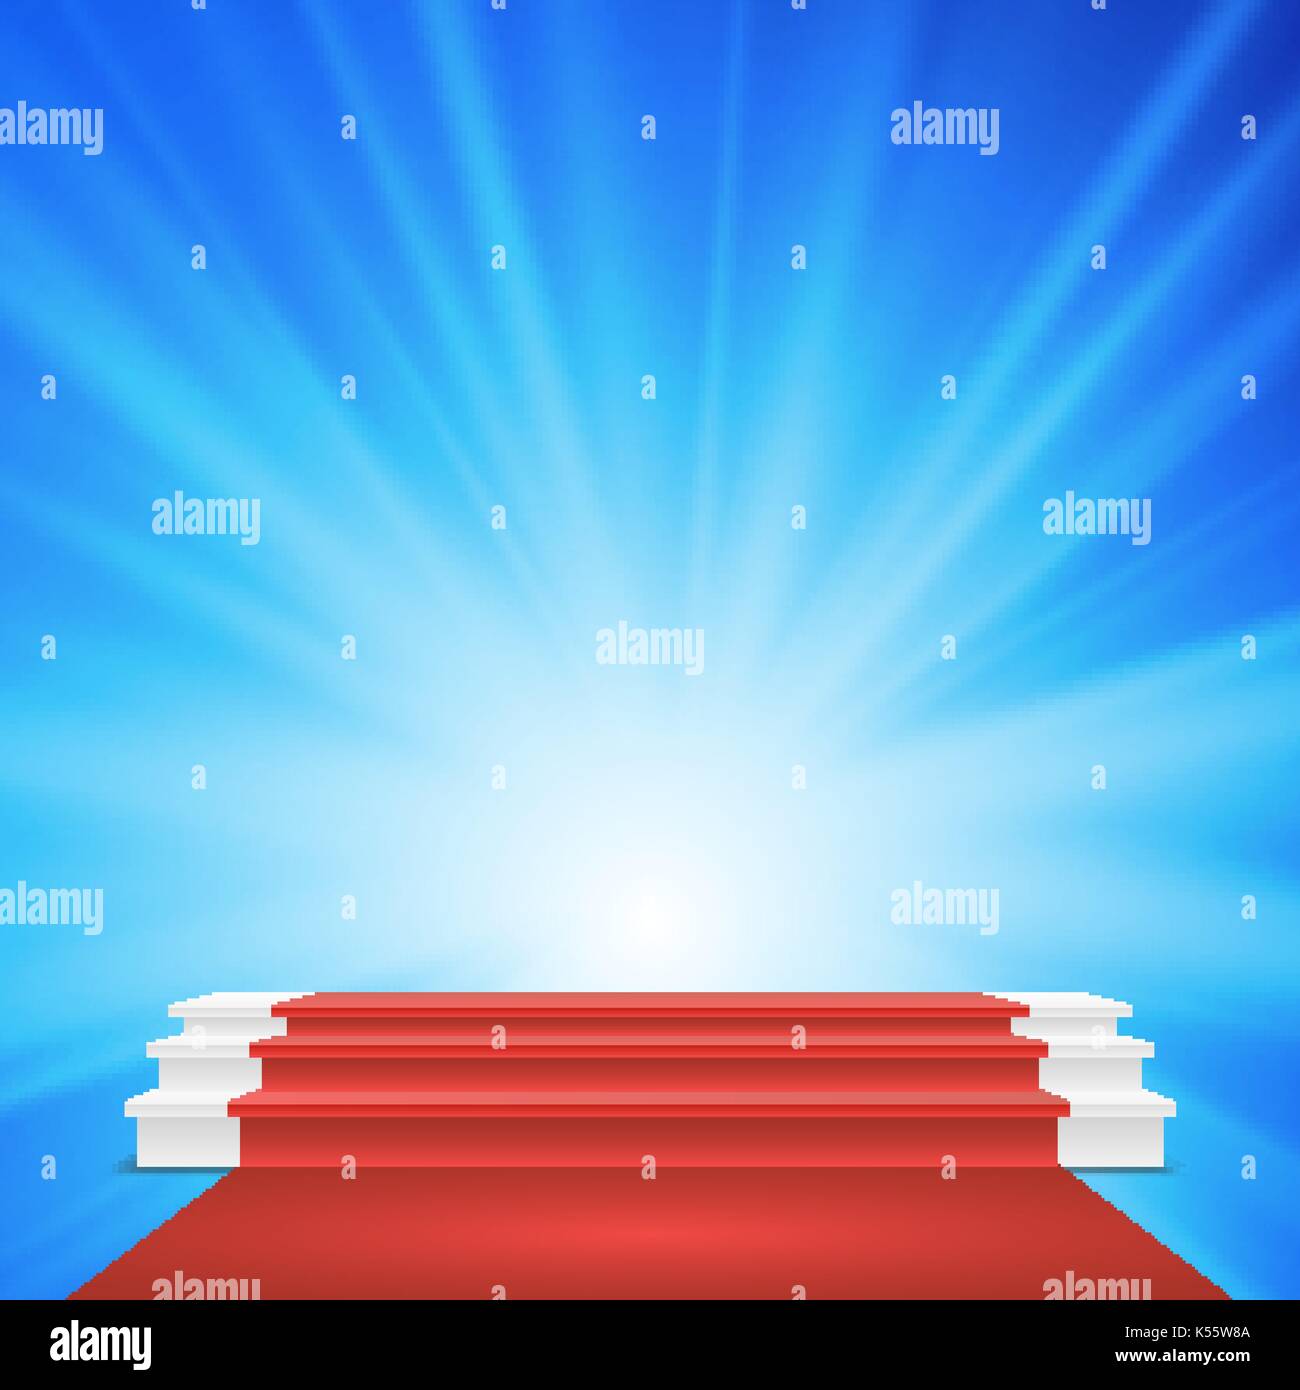 White Winners Podium Vector. Red Carpet. Stage For Awards Ceremony. Illustration Stock Vector